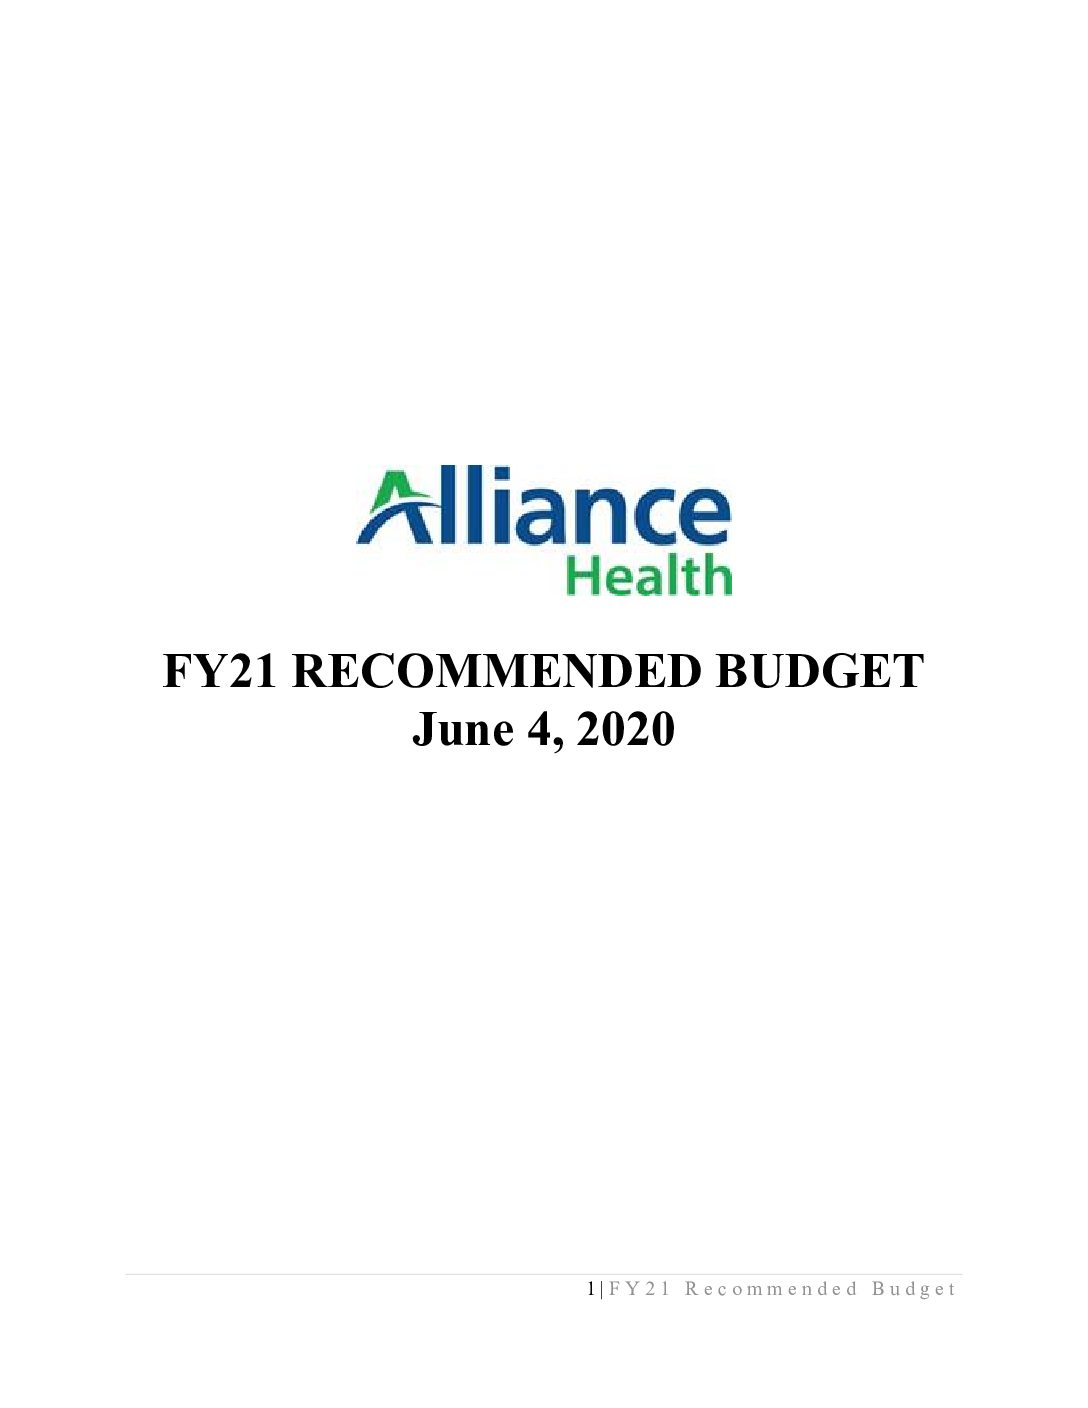 FY21 Recommended for Approval Budget